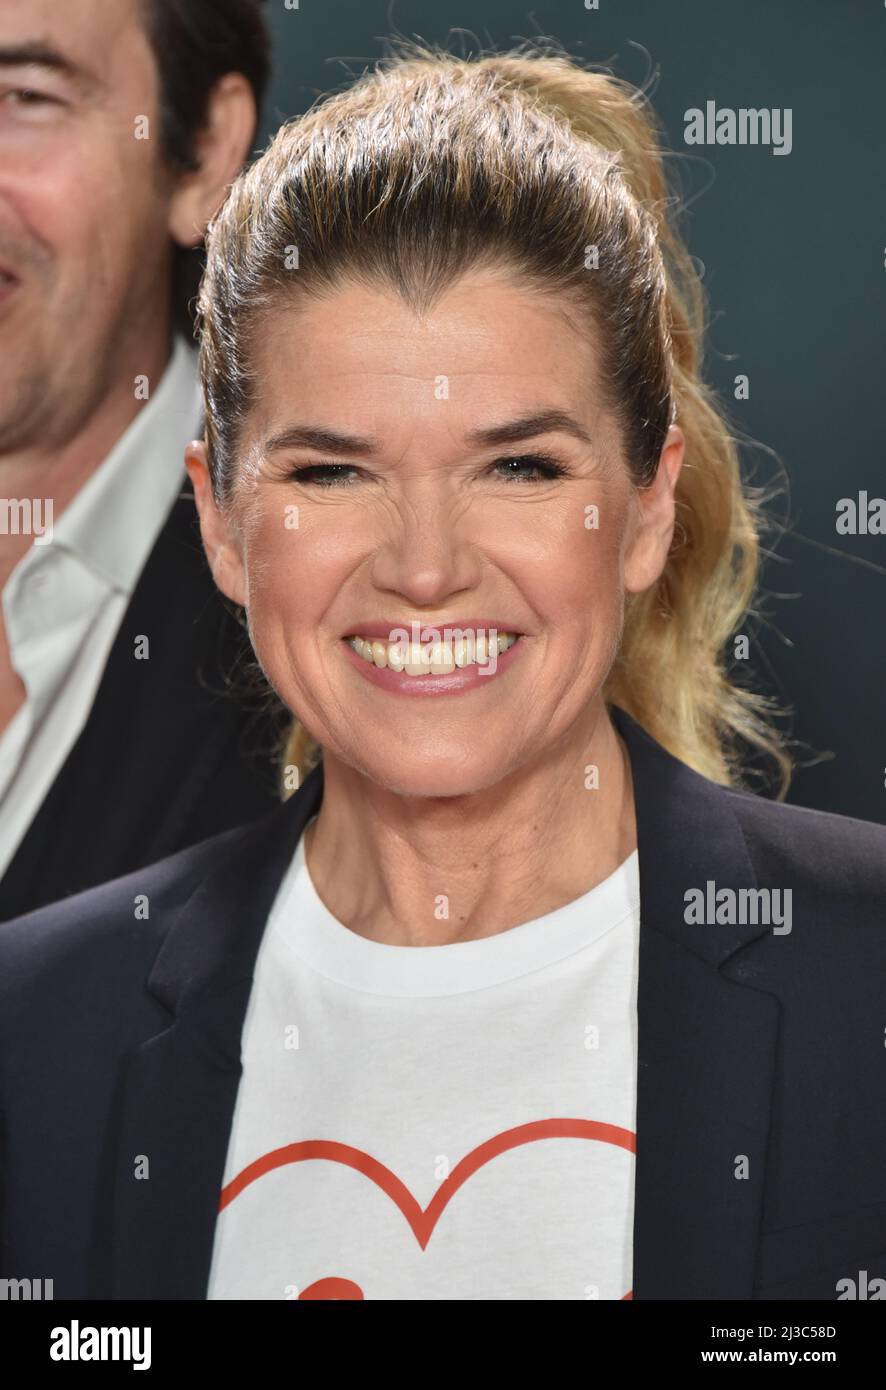 The series and films of Anke Engelke